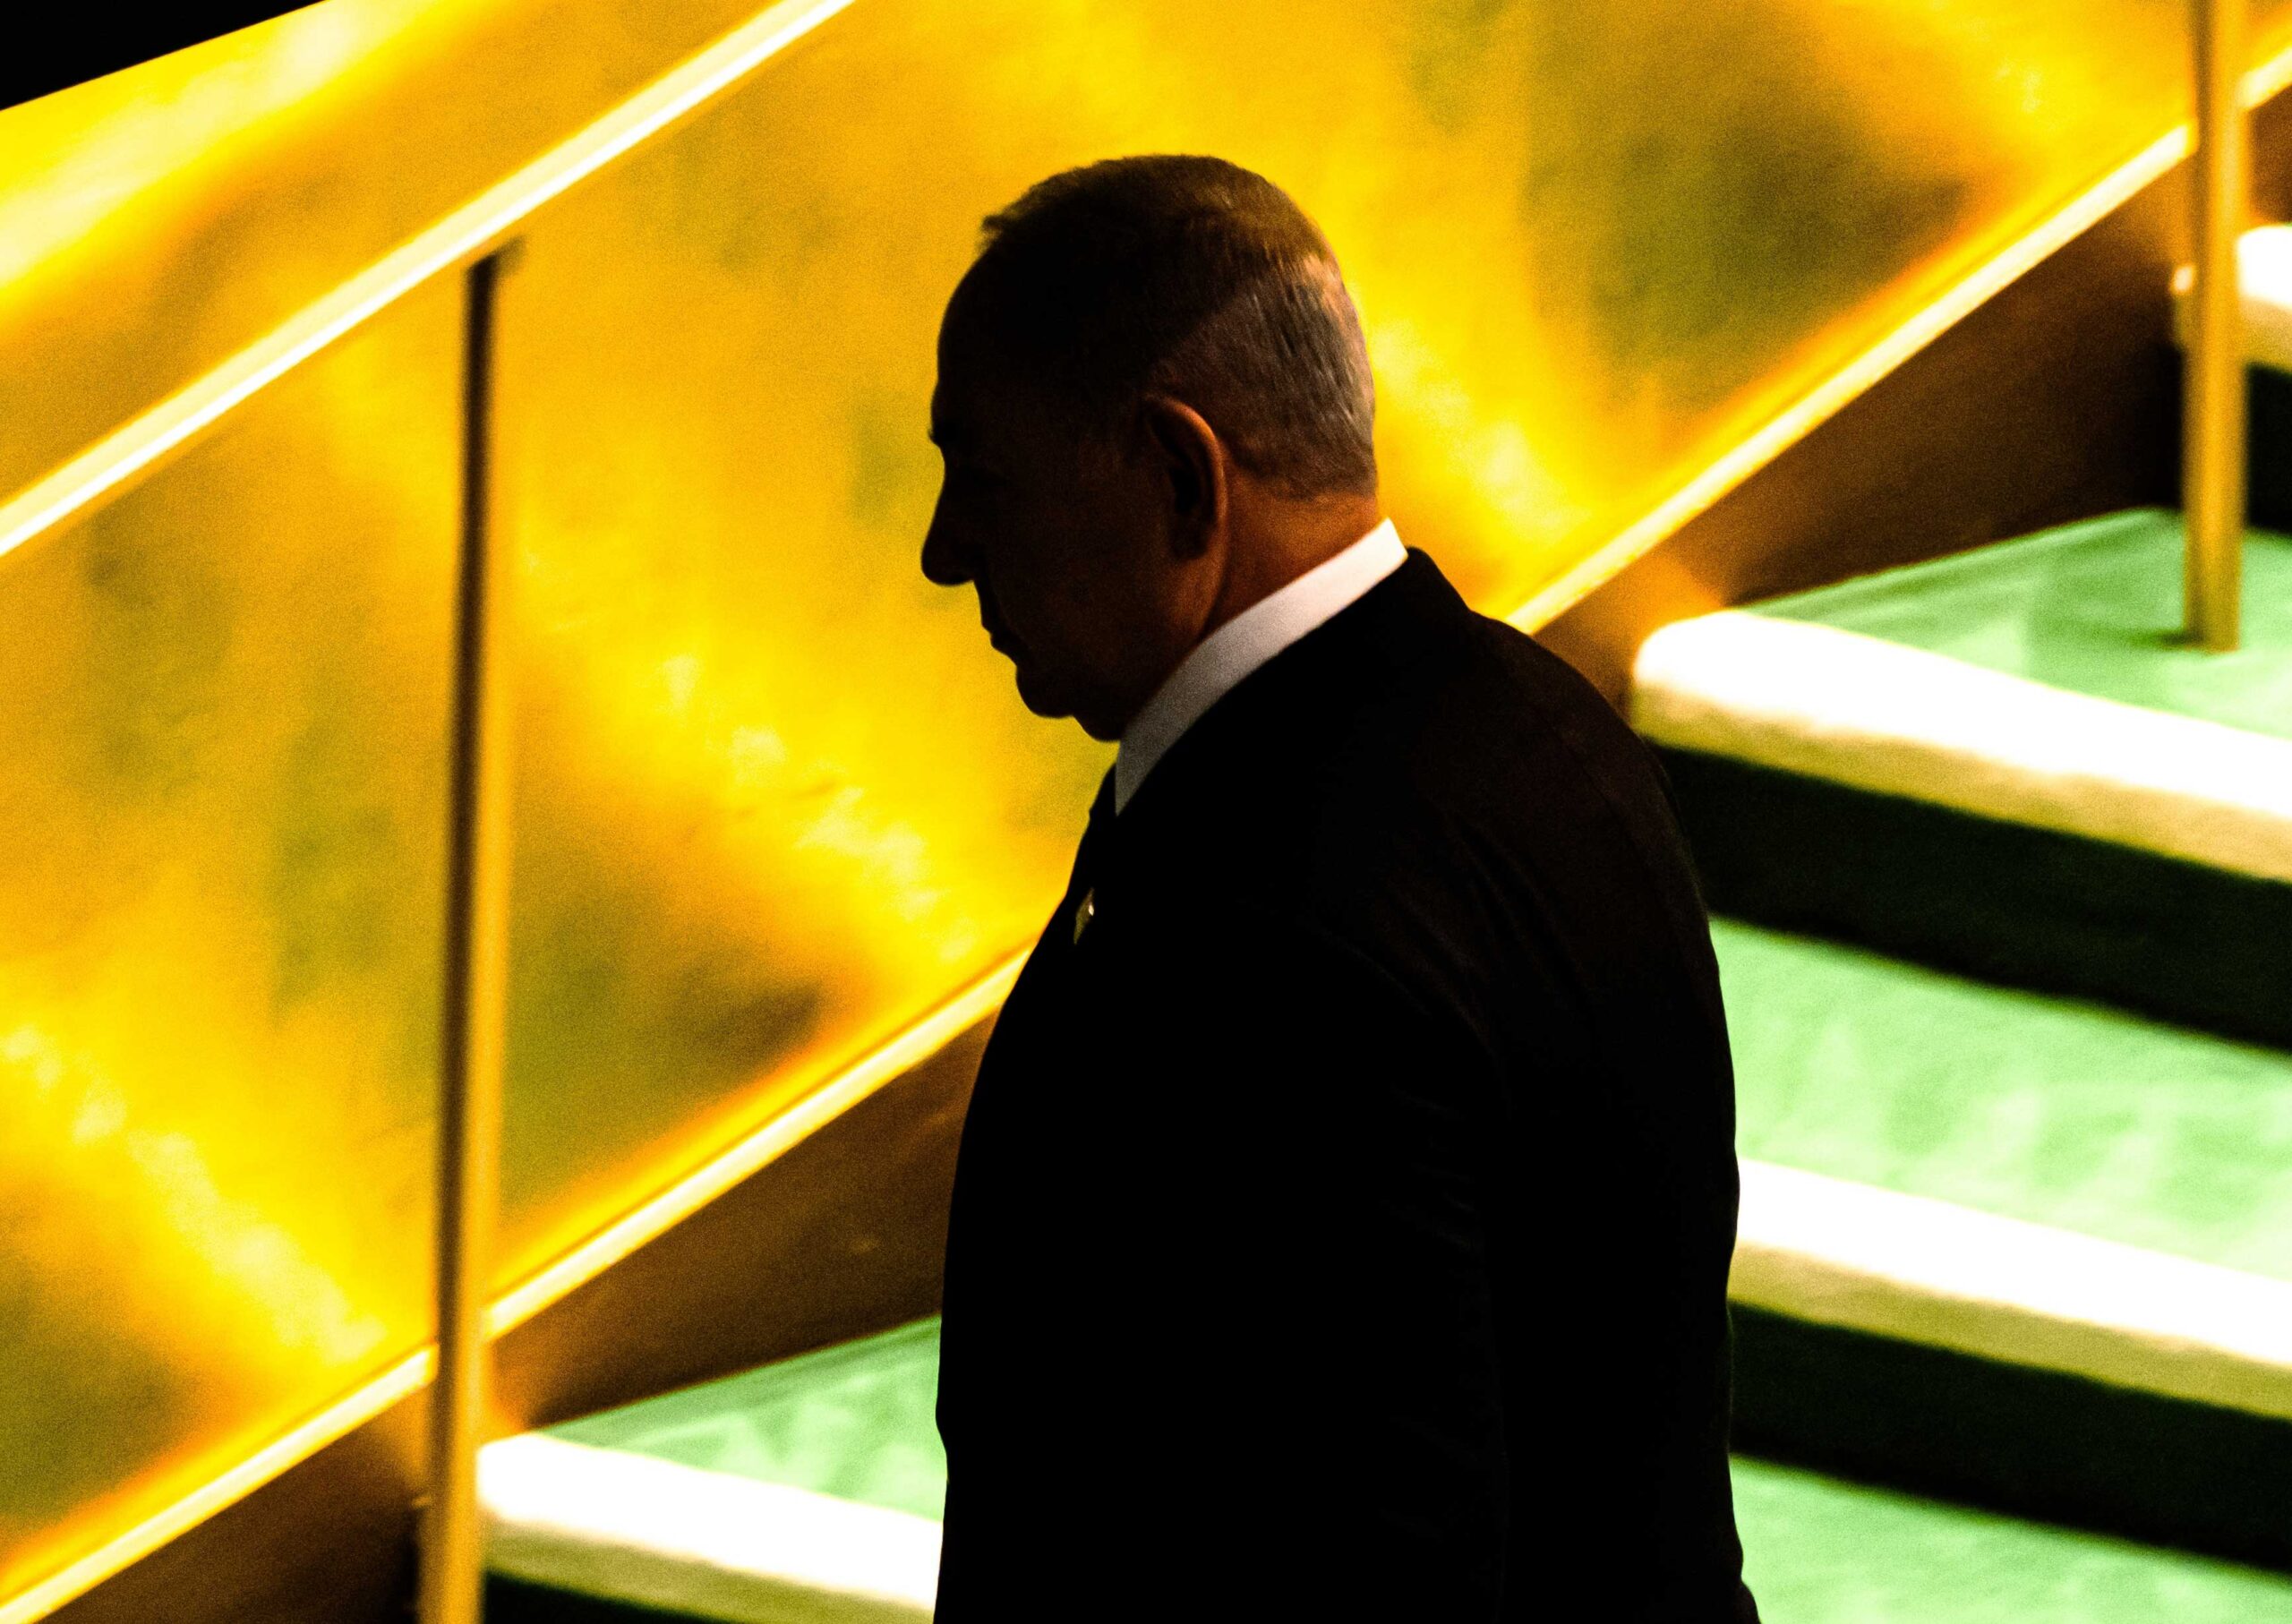 Israel may be on the cusp of a new era